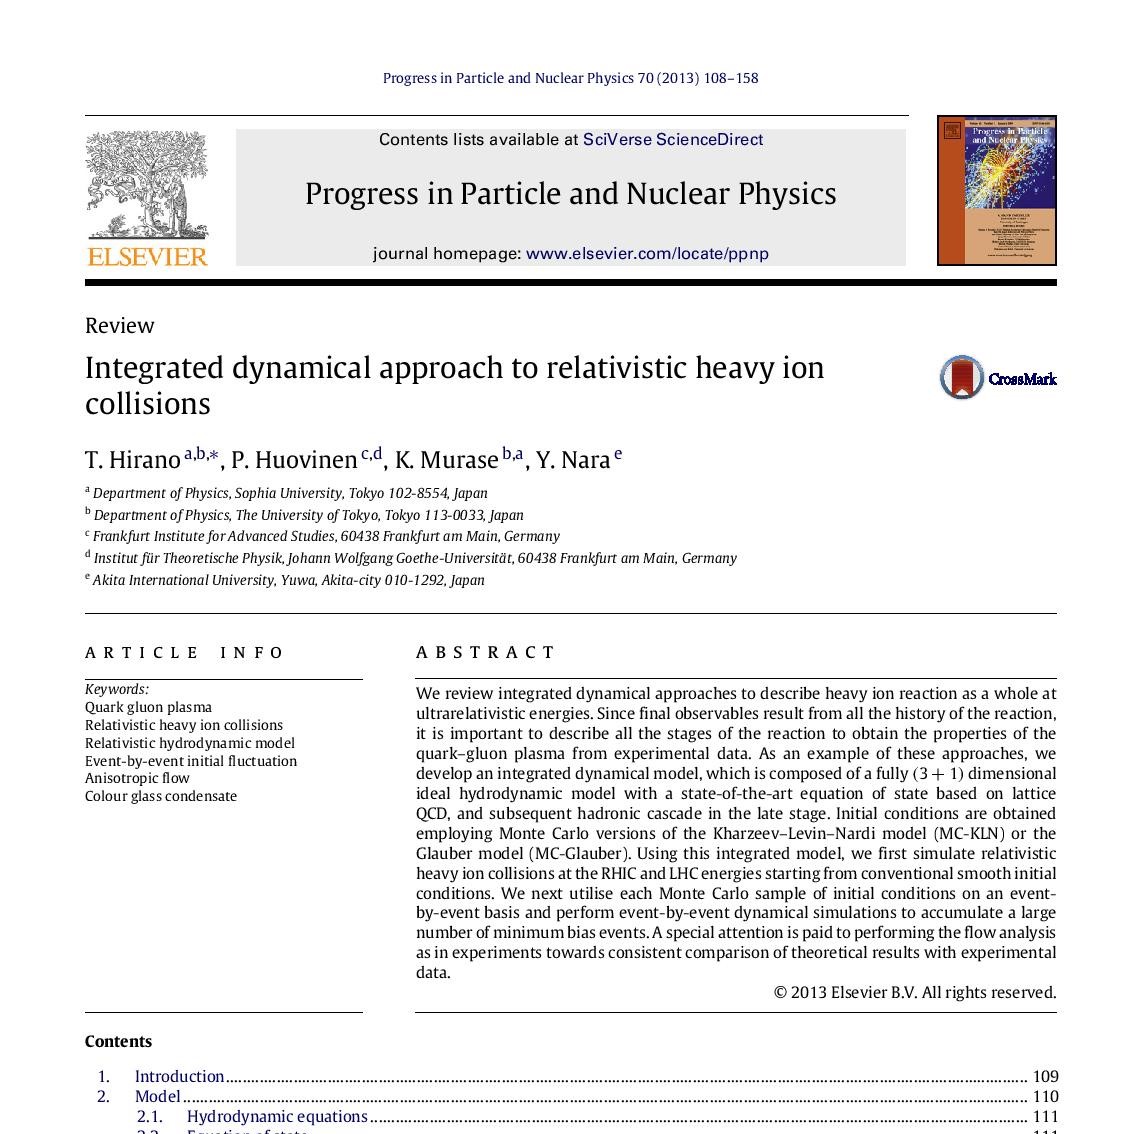 Review on integrated dynamical model